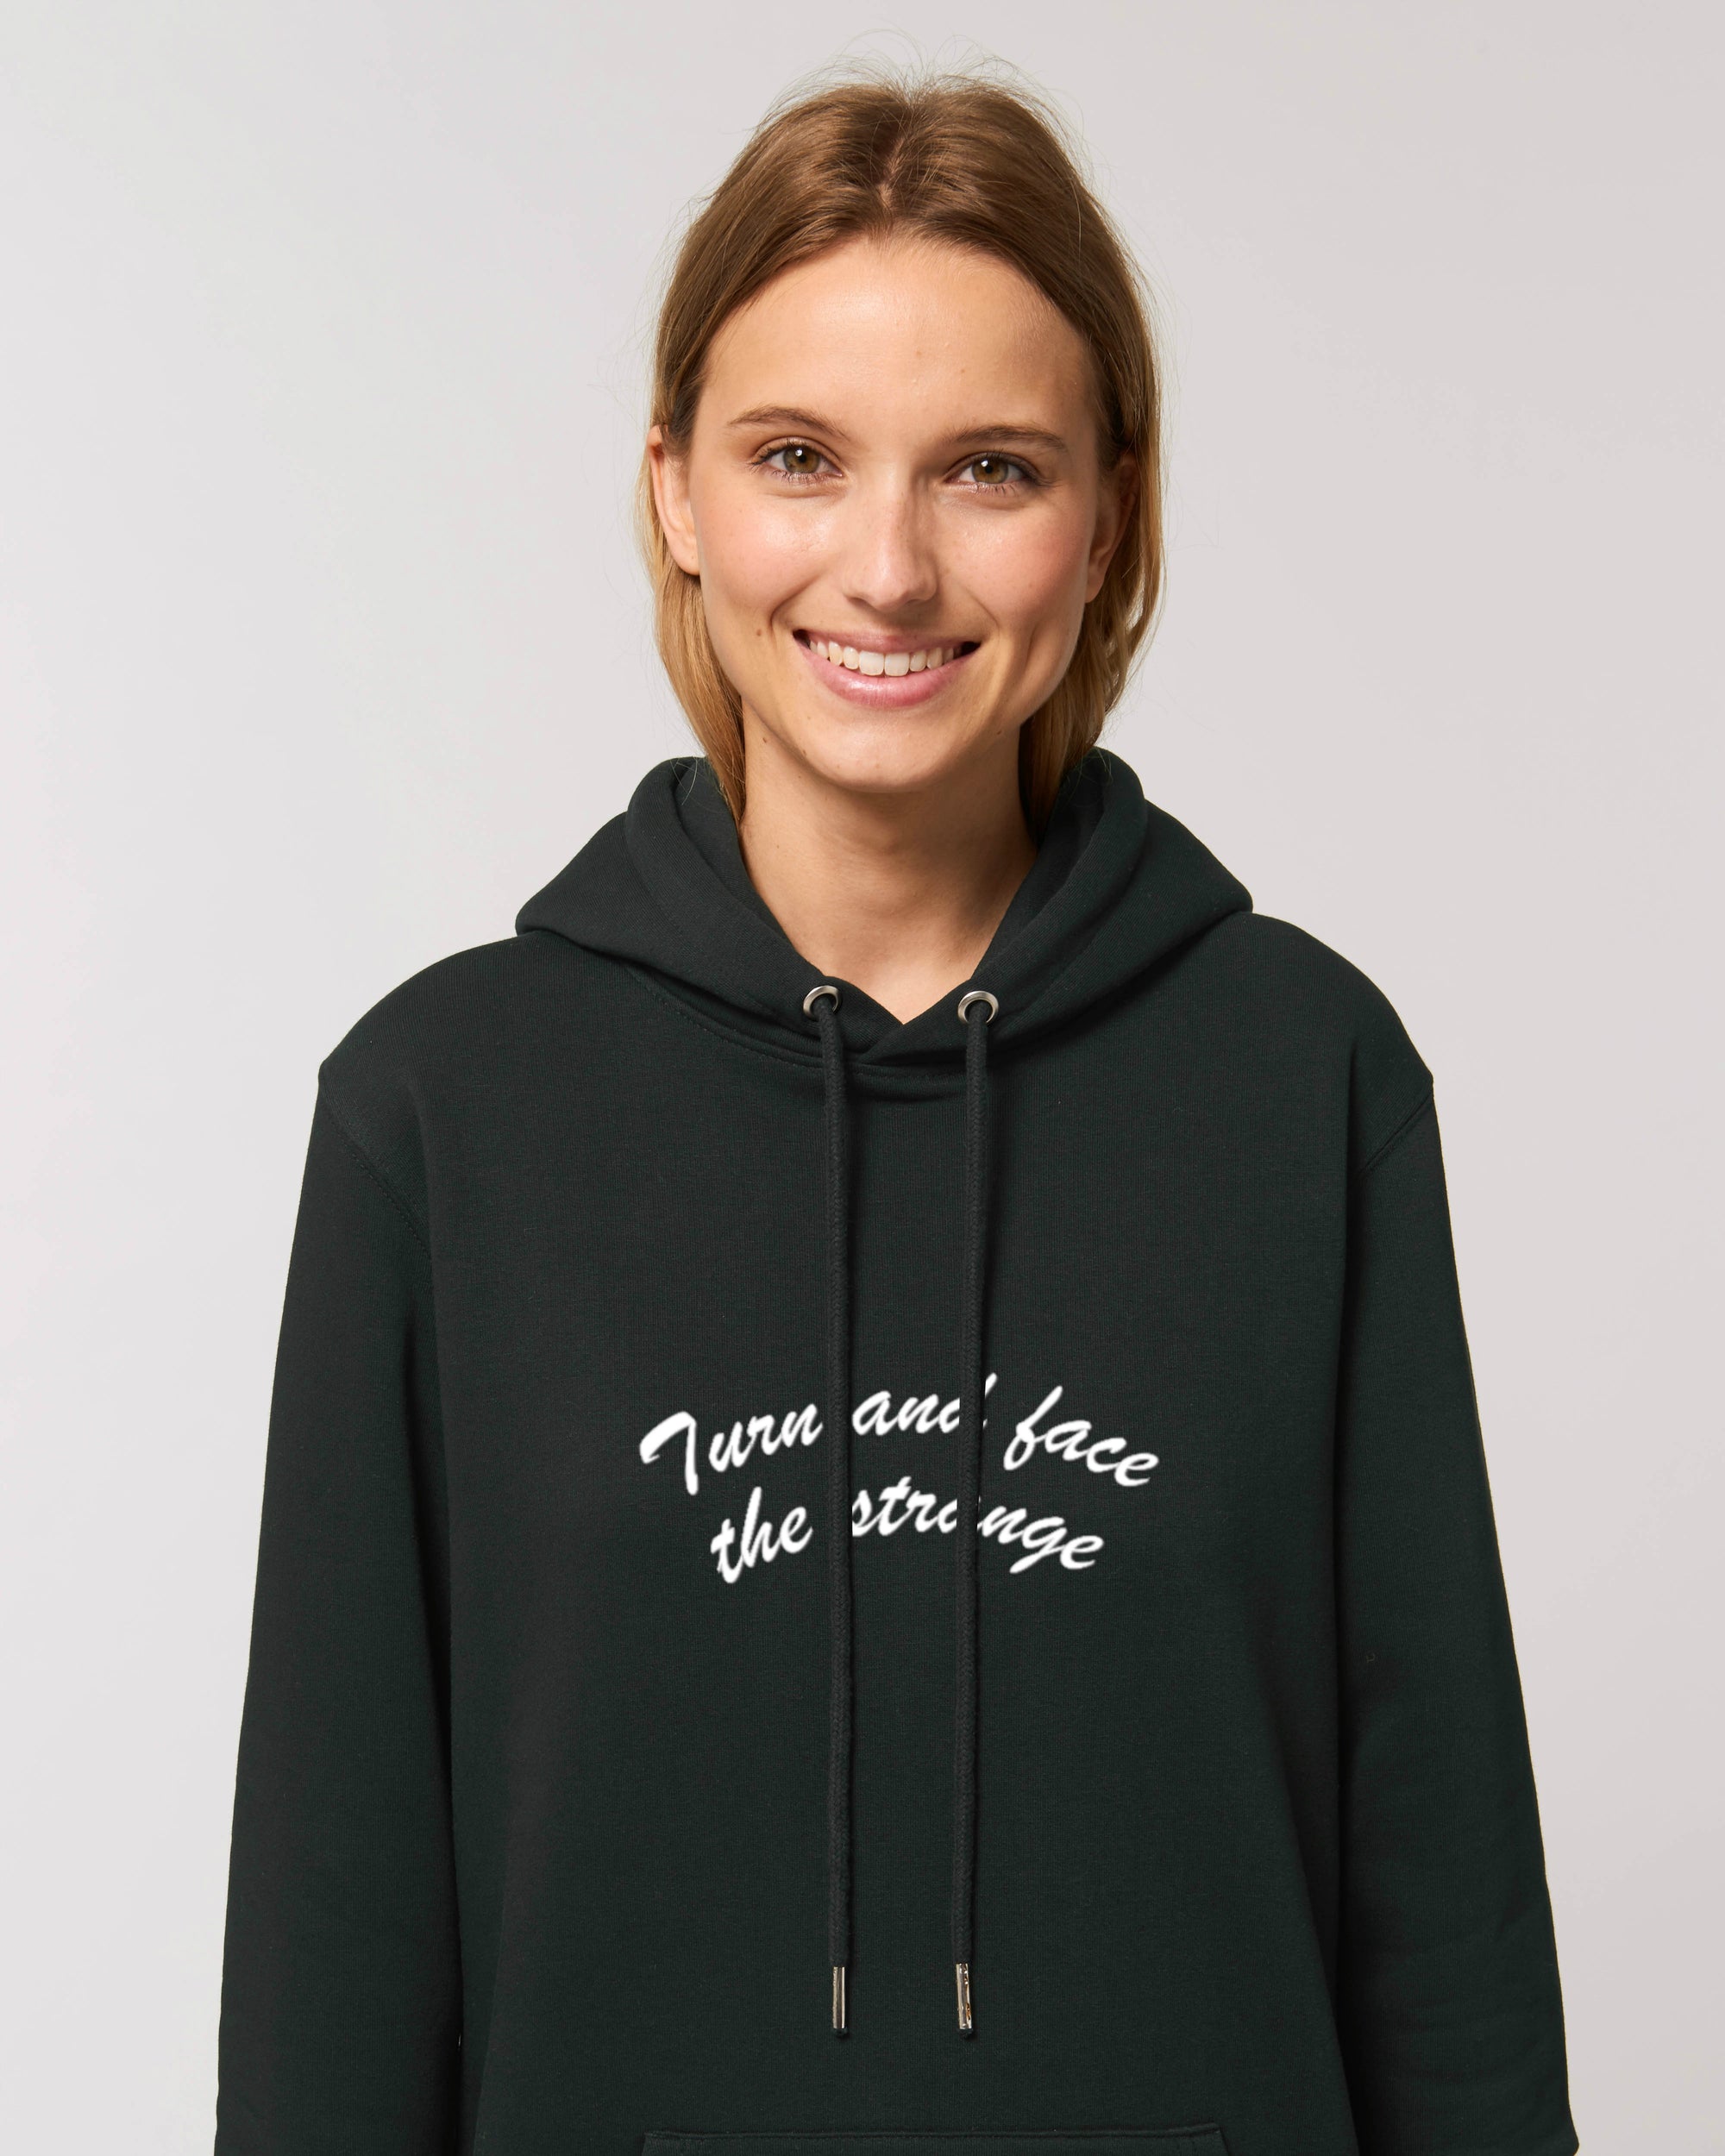 'TURN AND FACE THE STRANGE' EMBROIDERED WOMEN'S ORGANIC COTTON HOODIE DRESS